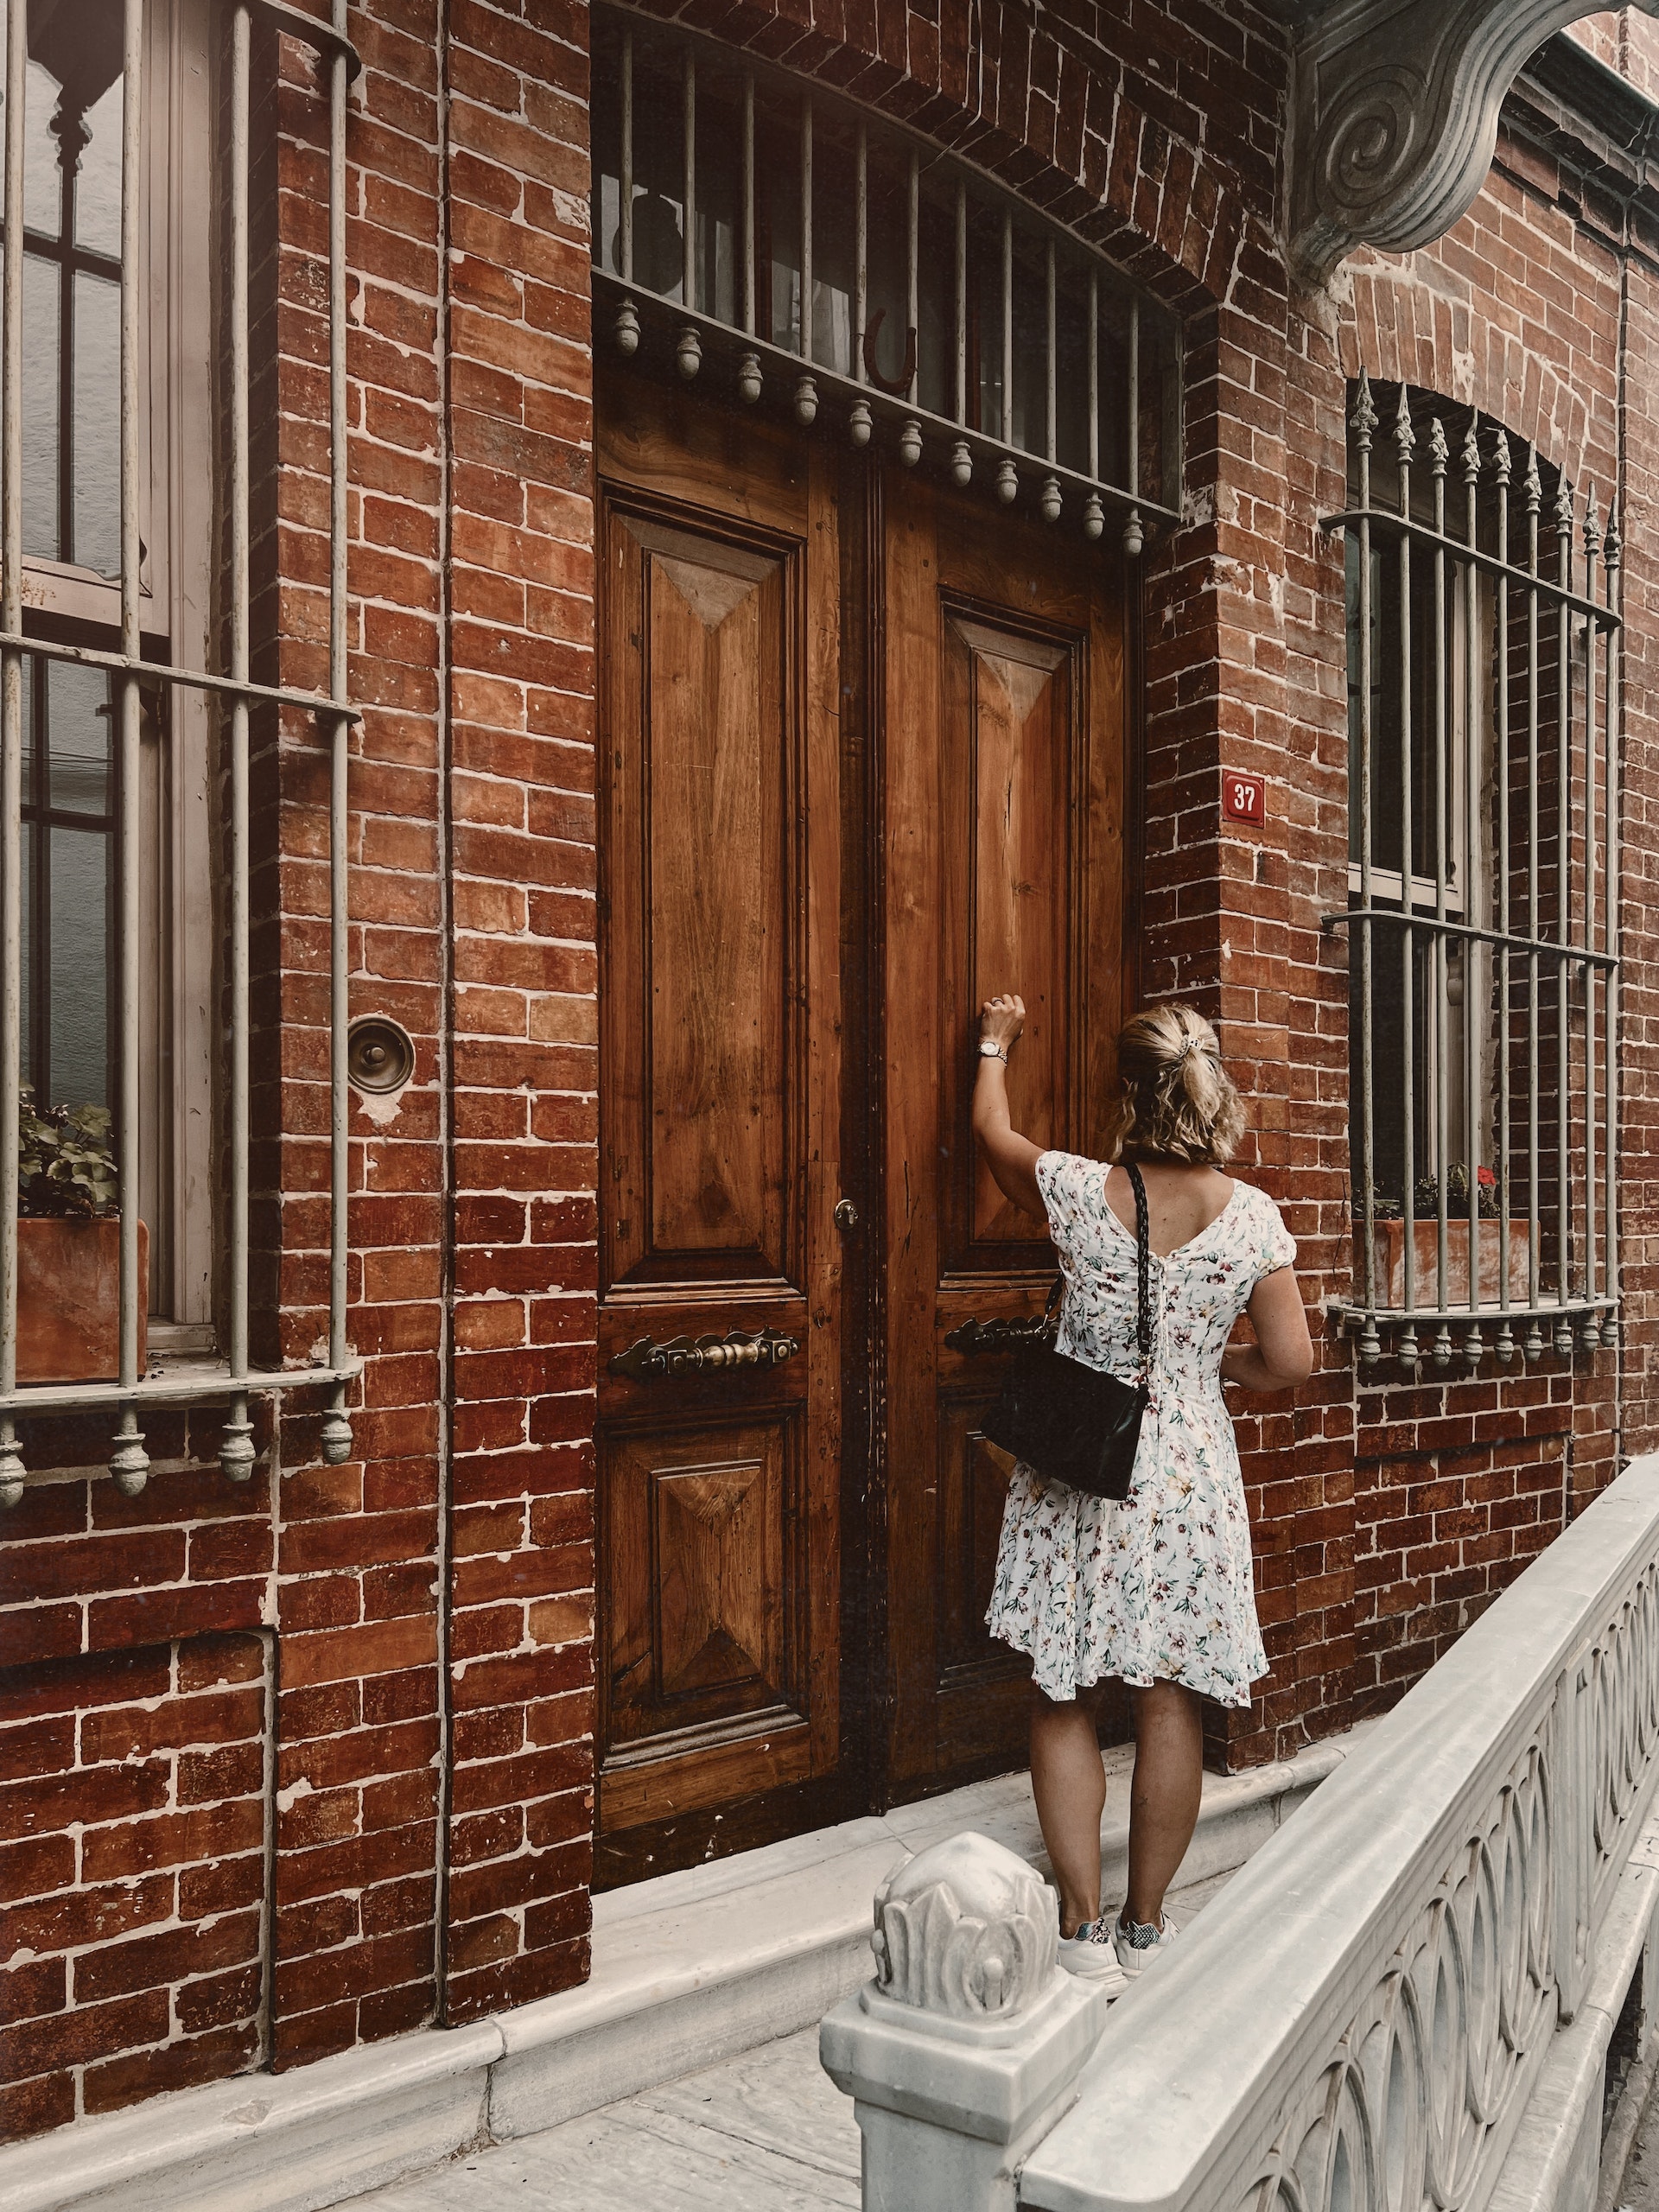 A woman knocks on a wooden door | Source: Pexels